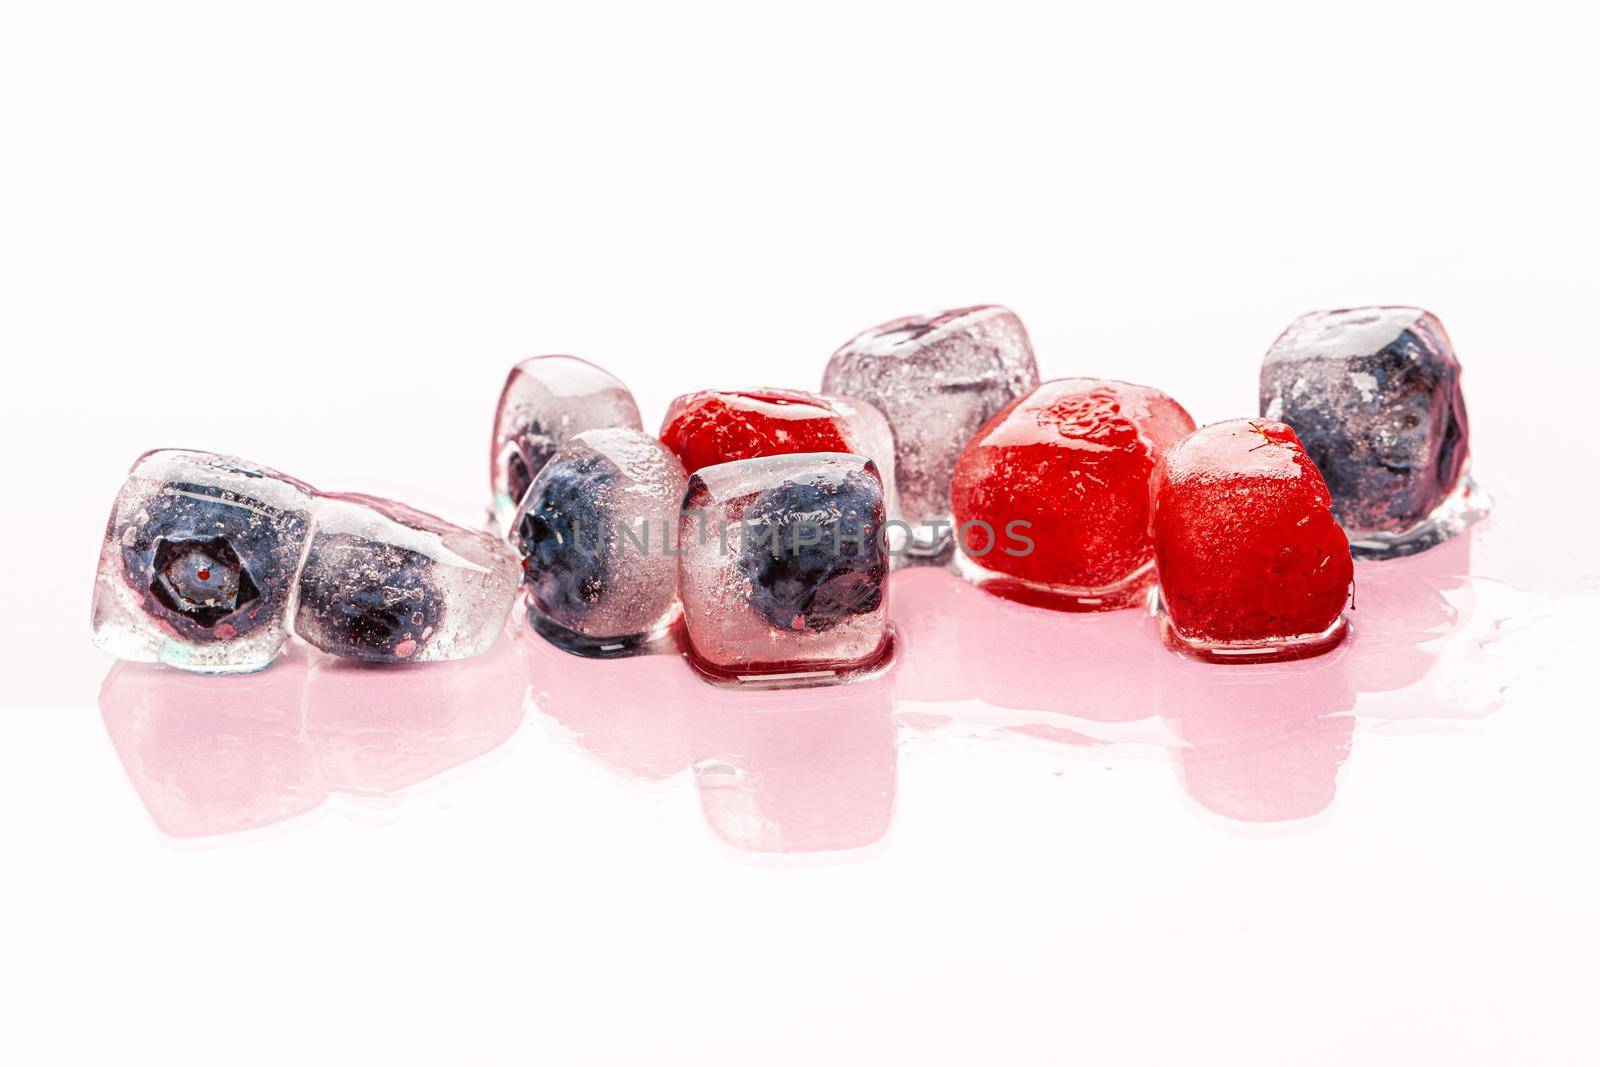 Fresh berries frozen in ice cubes for drinks. Close up.